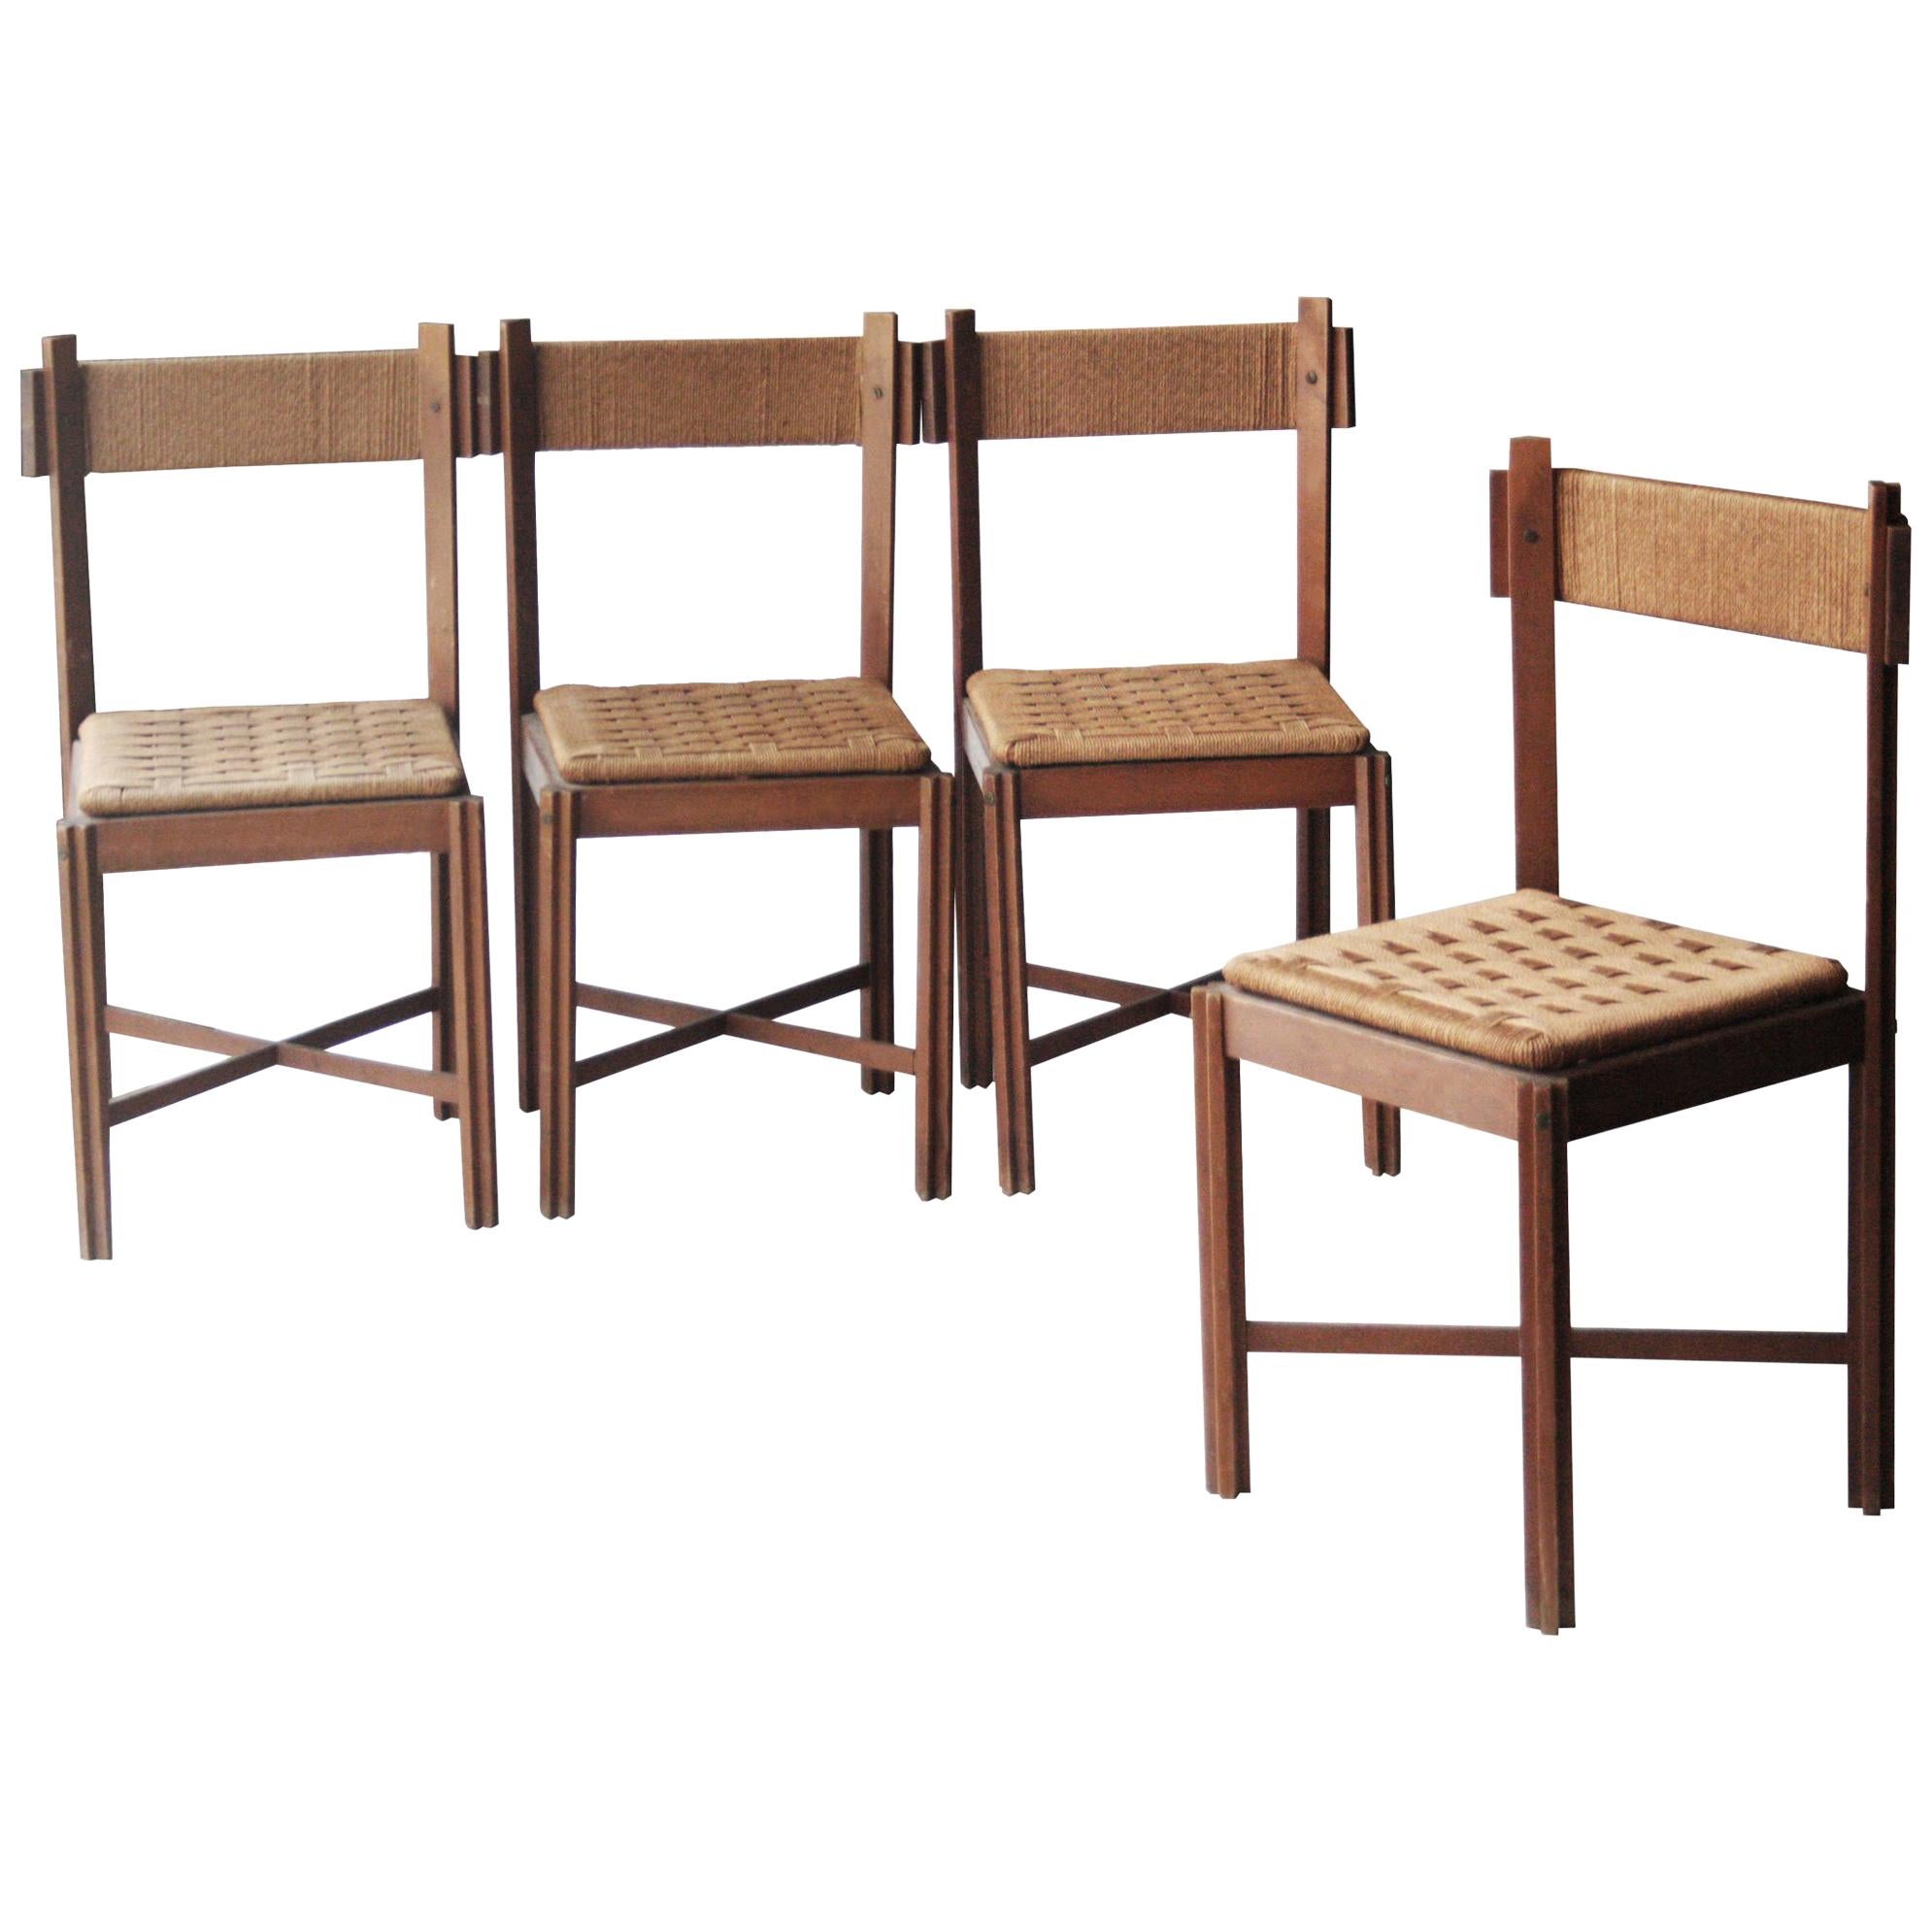 Mid-Century Modern Set of Four Walnut Chairs. France, 1950